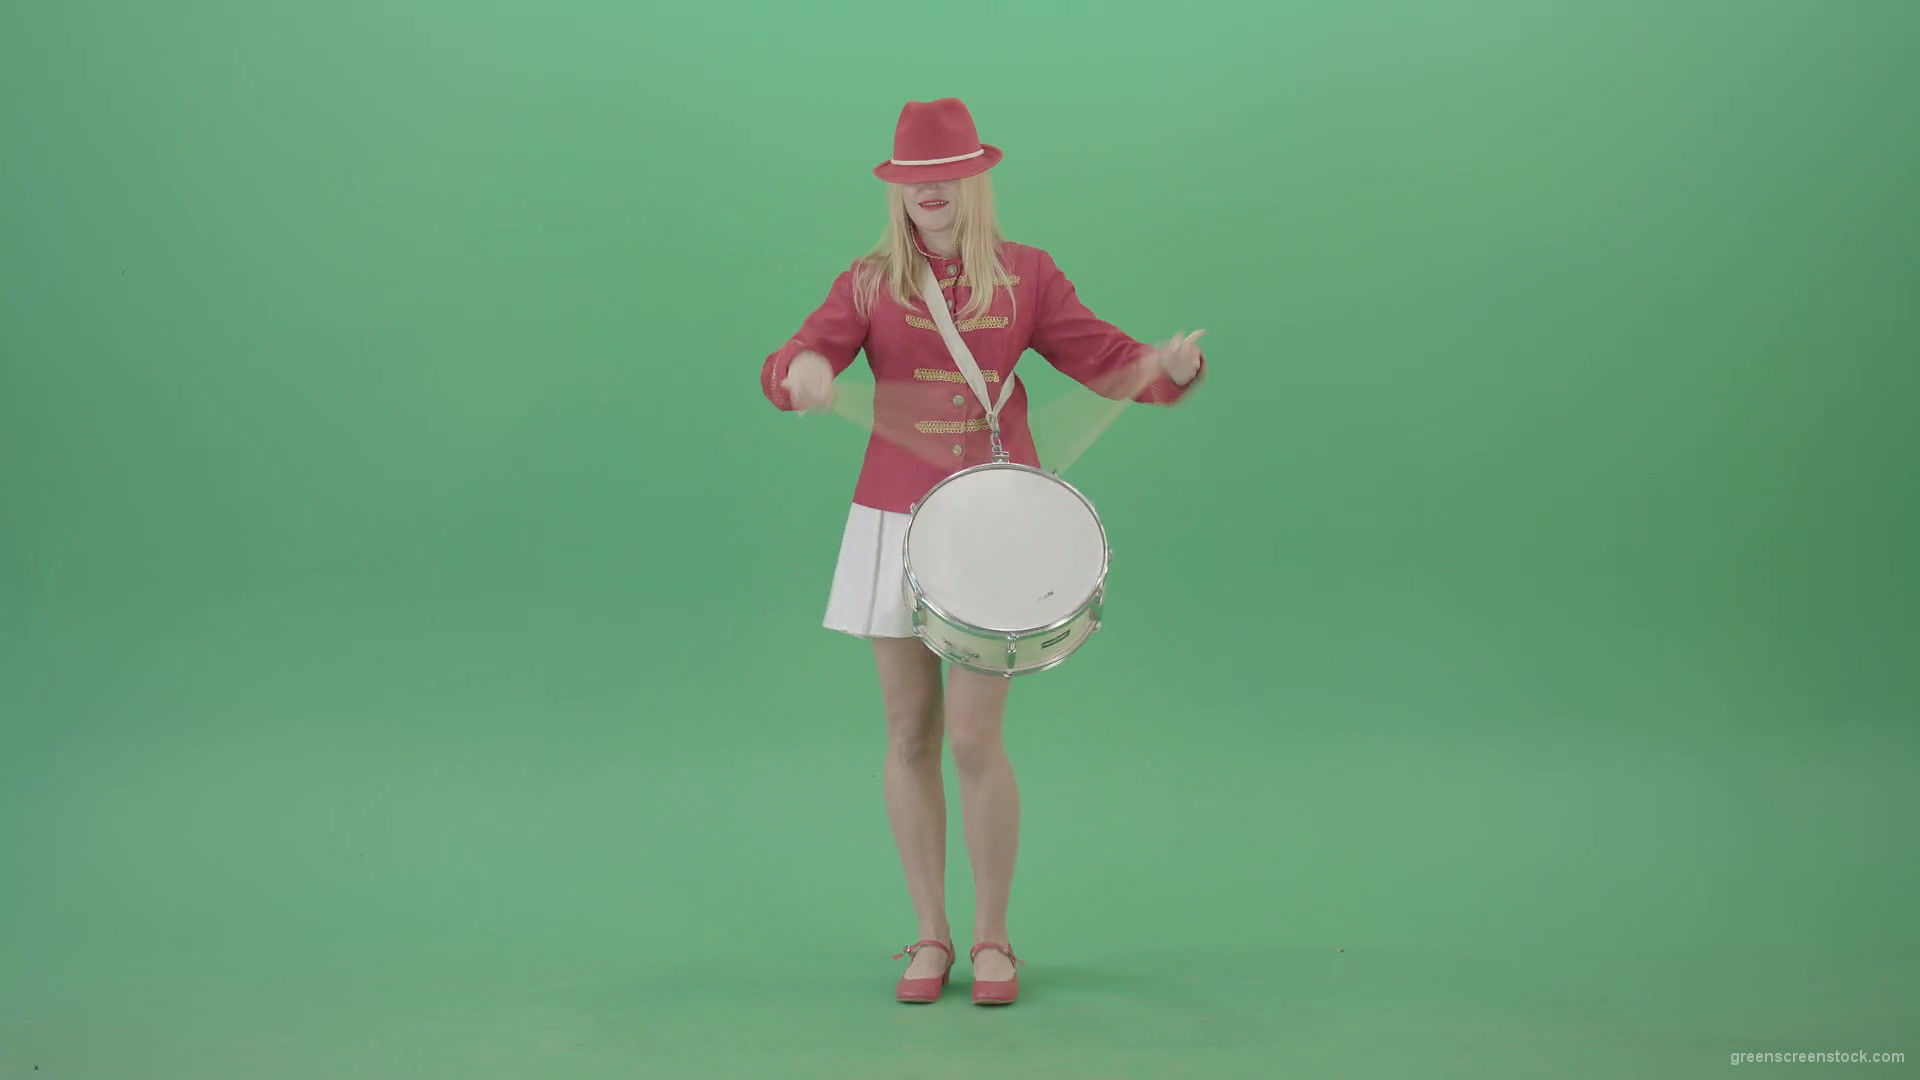 vj video background Blonde-Girl-playing-snare-drum-fast-and-marching-on-green-screen-4K-Video-Footage-1920_003